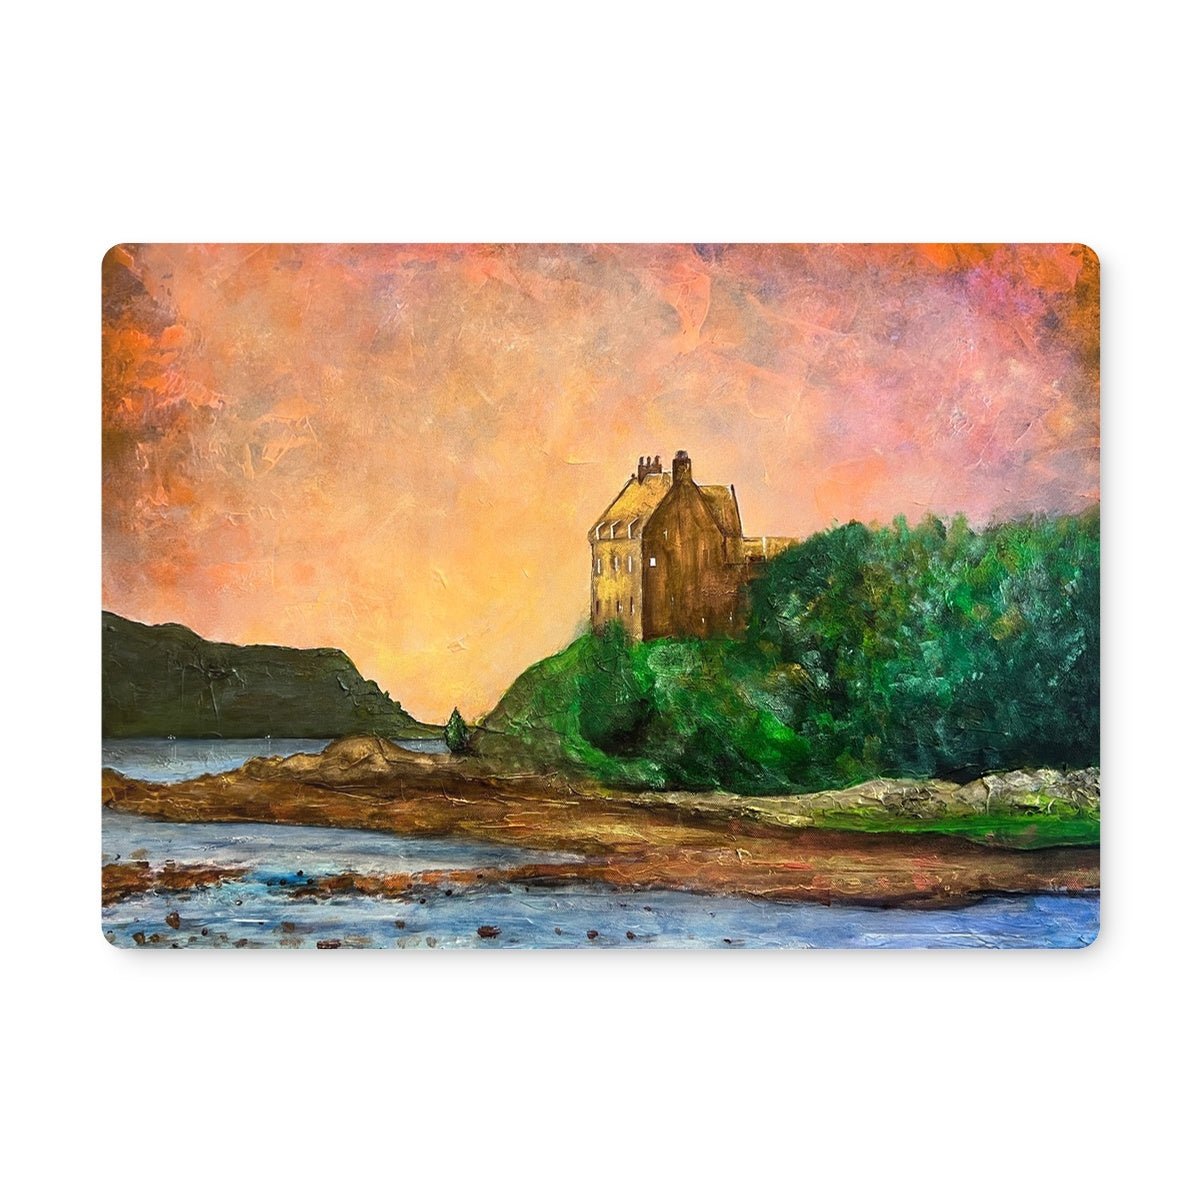 Duntrune Castle Art Gifts Placemat-Placemats-Historic & Iconic Scotland Art Gallery-Single Placemat-Paintings, Prints, Homeware, Art Gifts From Scotland By Scottish Artist Kevin Hunter